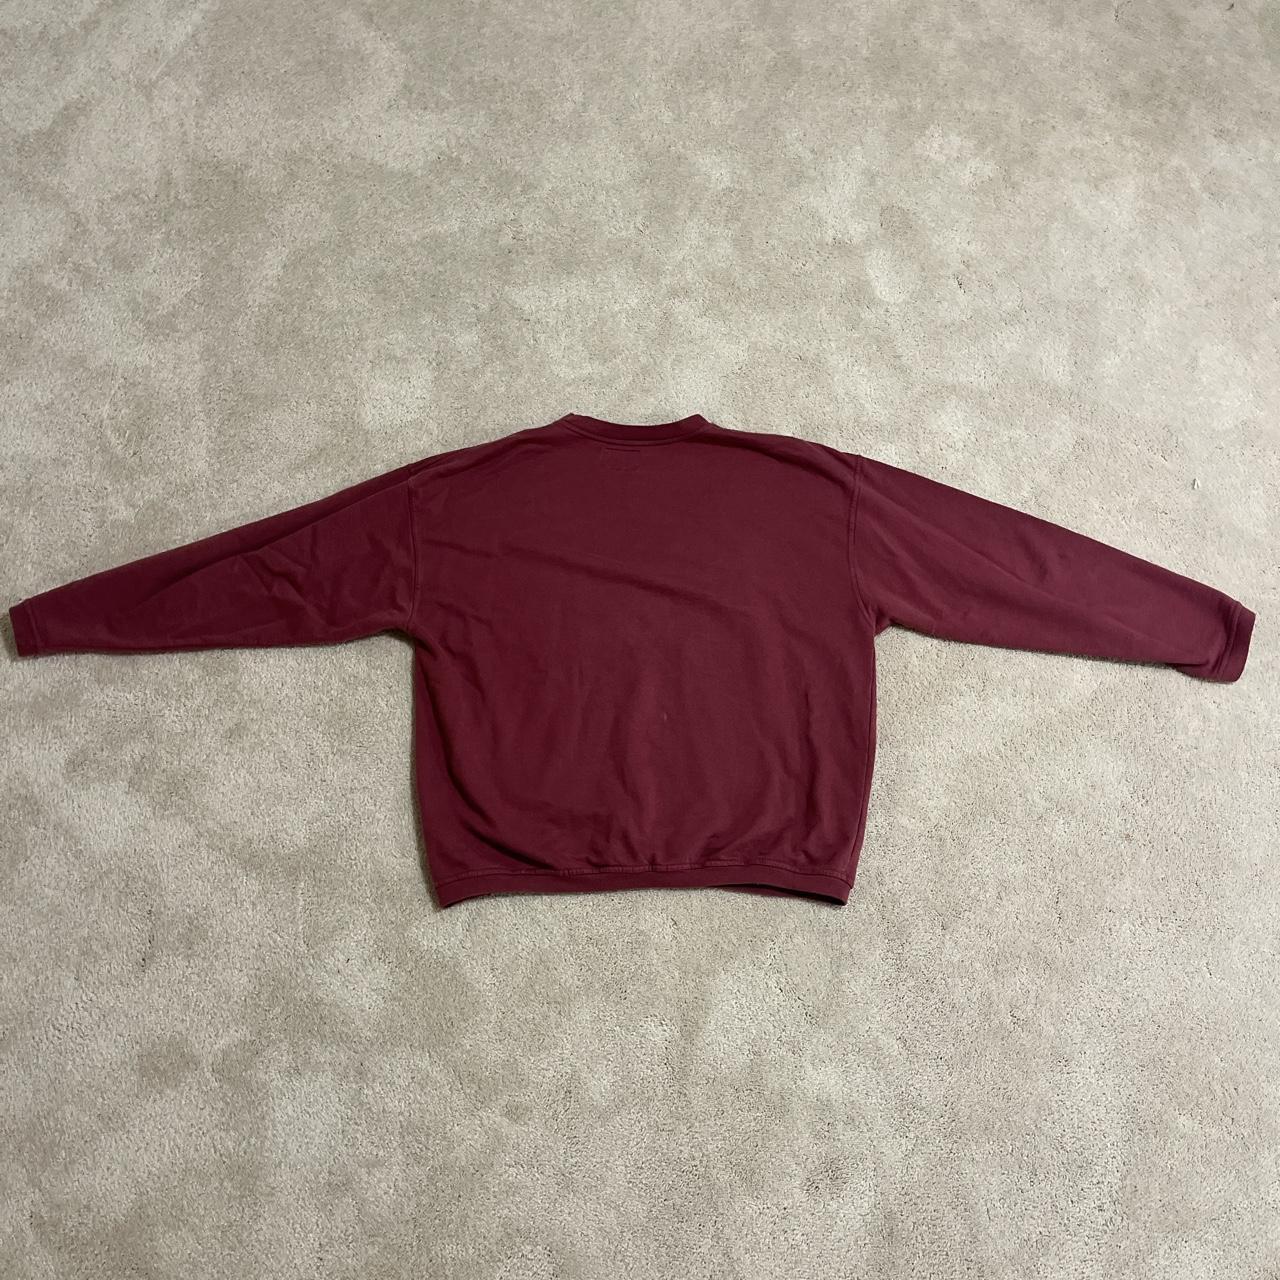 Champs Sports Men's Burgundy and Red Sweatshirt (2)